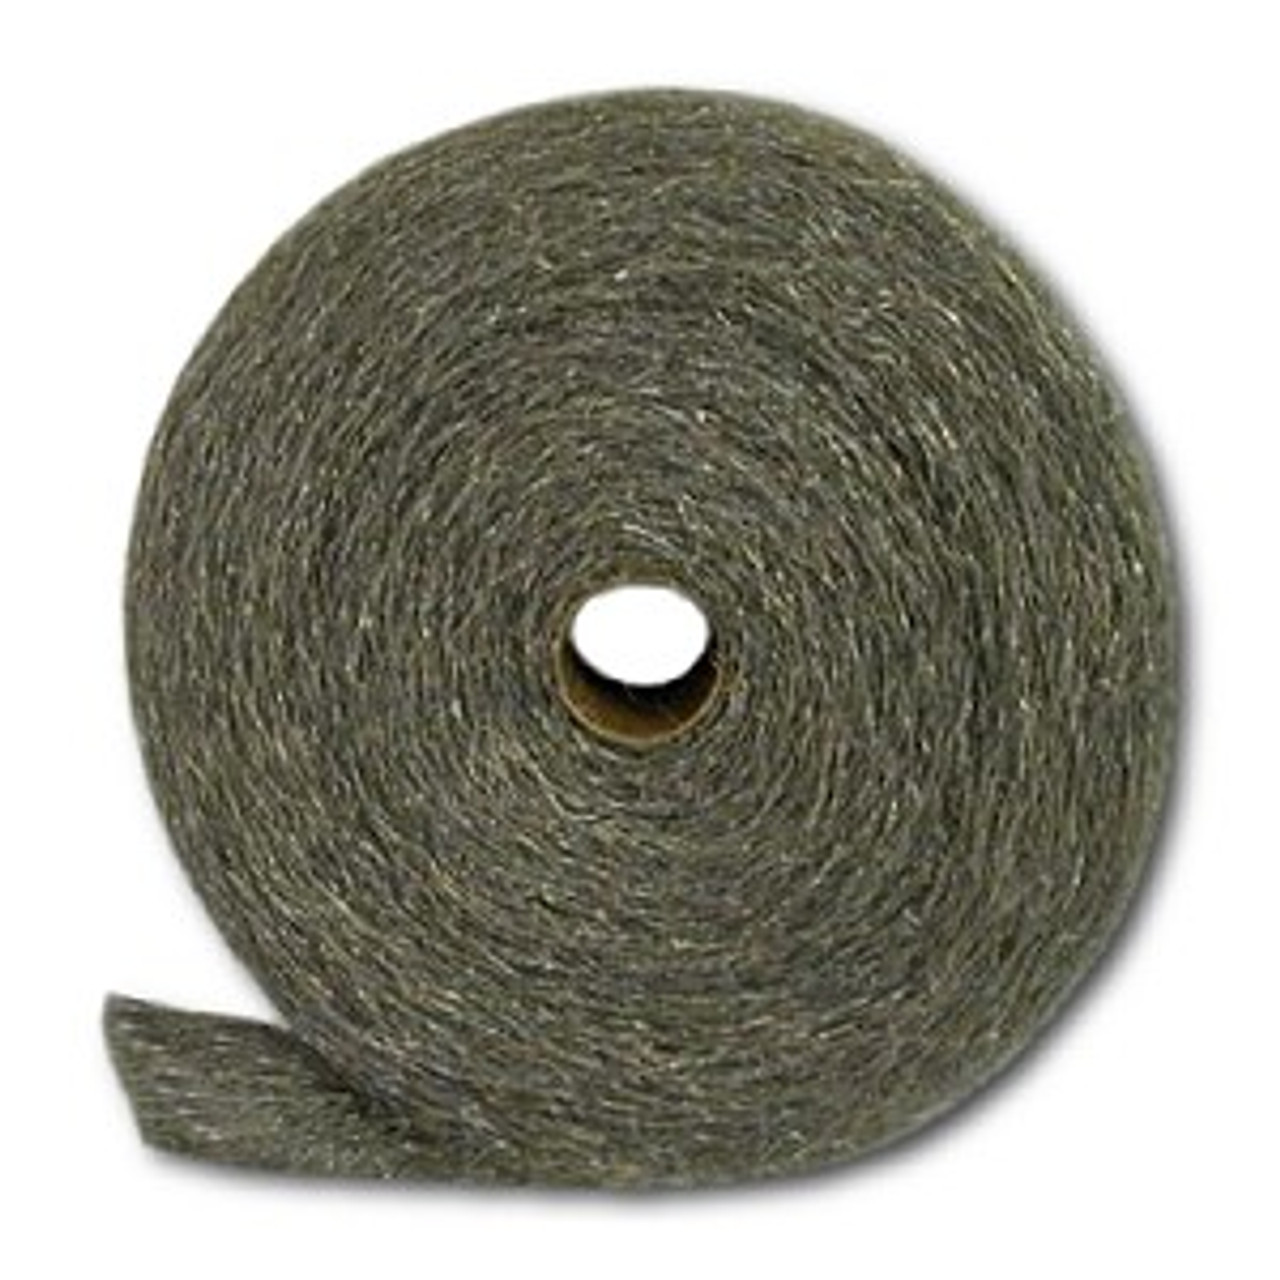 Case of 6 For Scrubbing and Scouring 105043 Global Material Technologies Steel Wool Reel 0 Fine Grade Reel 5 lb 